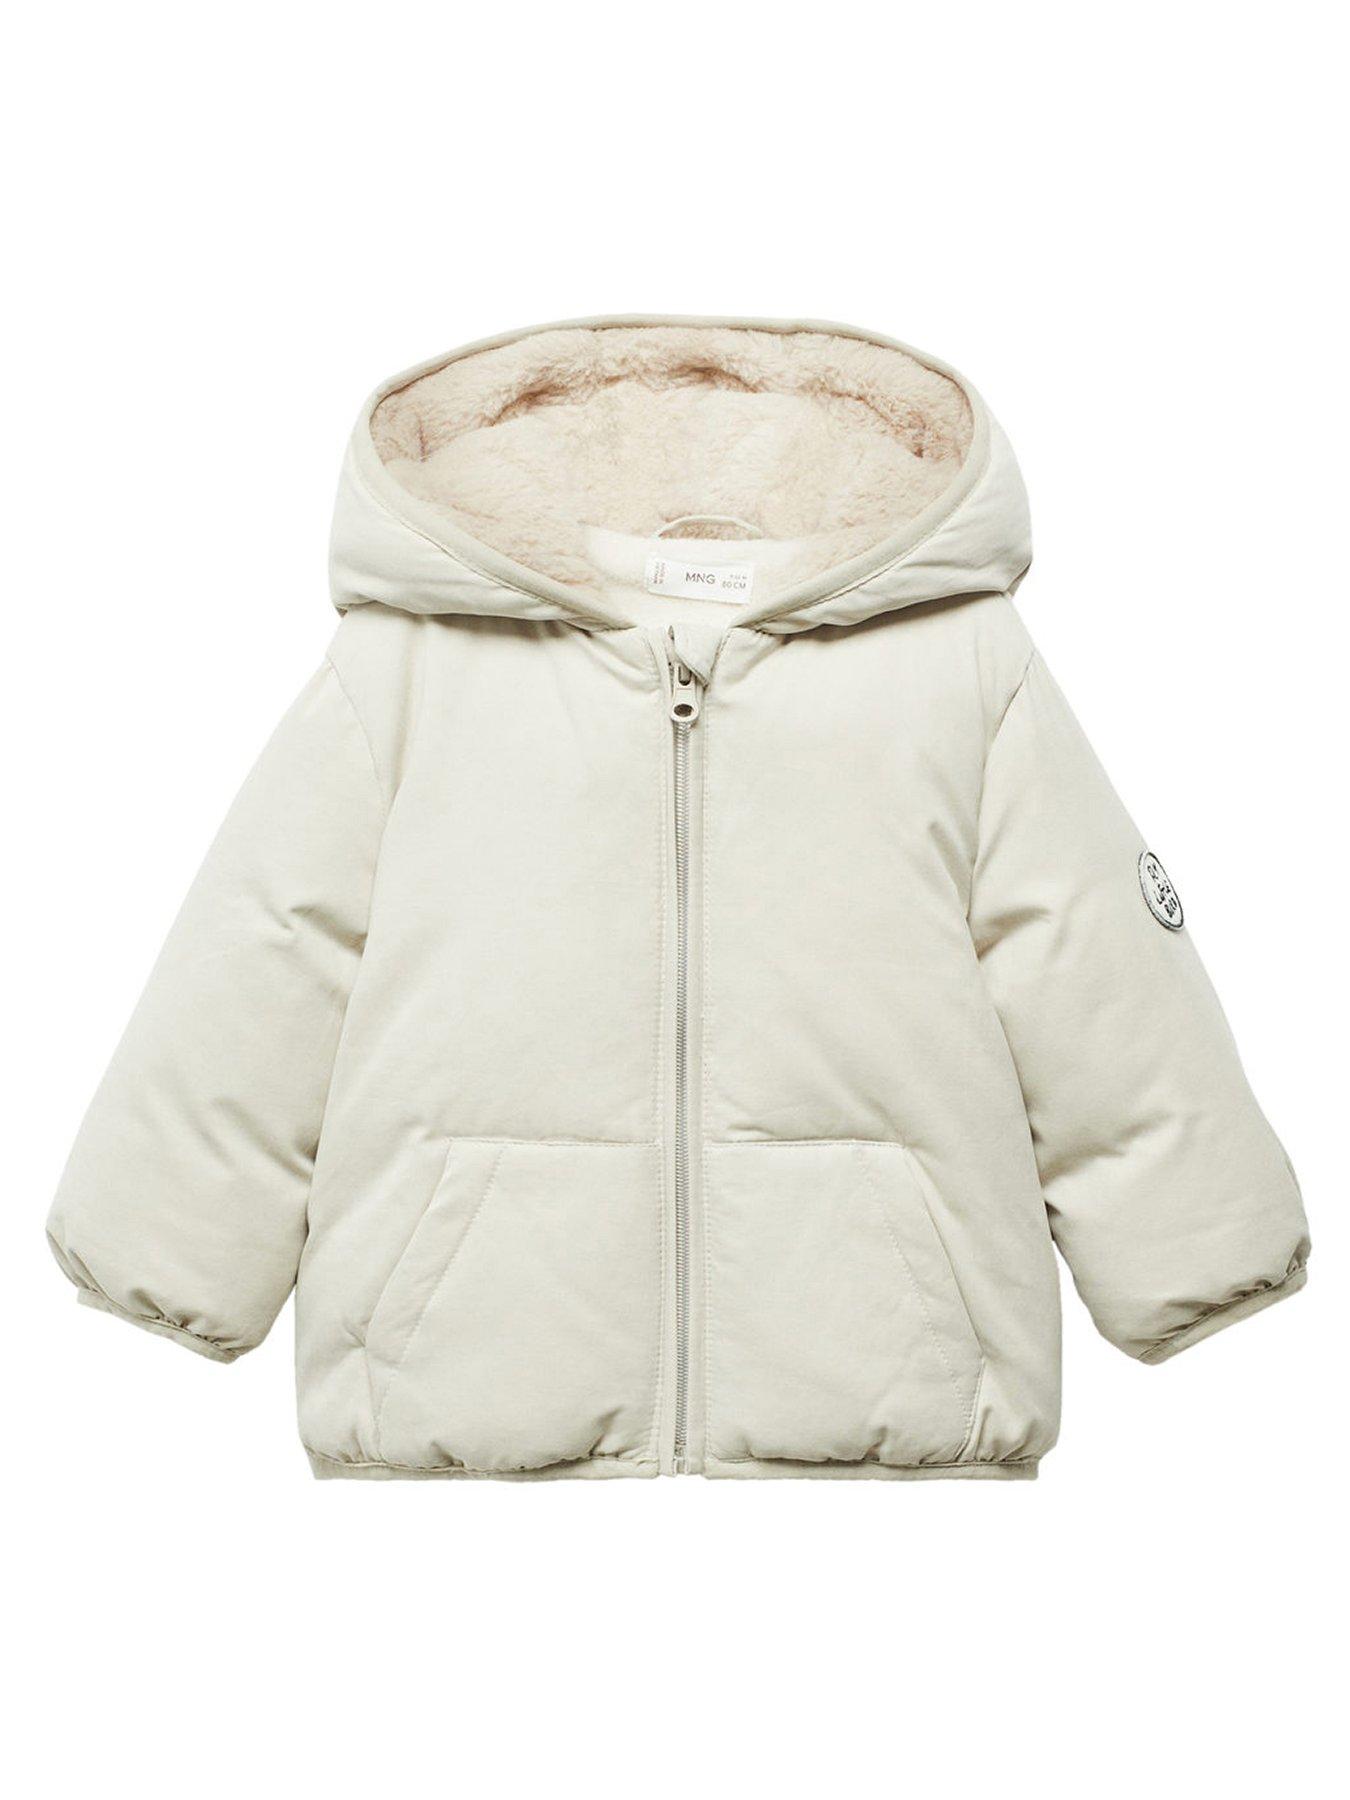 Mango Younger Boys Faux Fur Lined Padded Coat - Cream